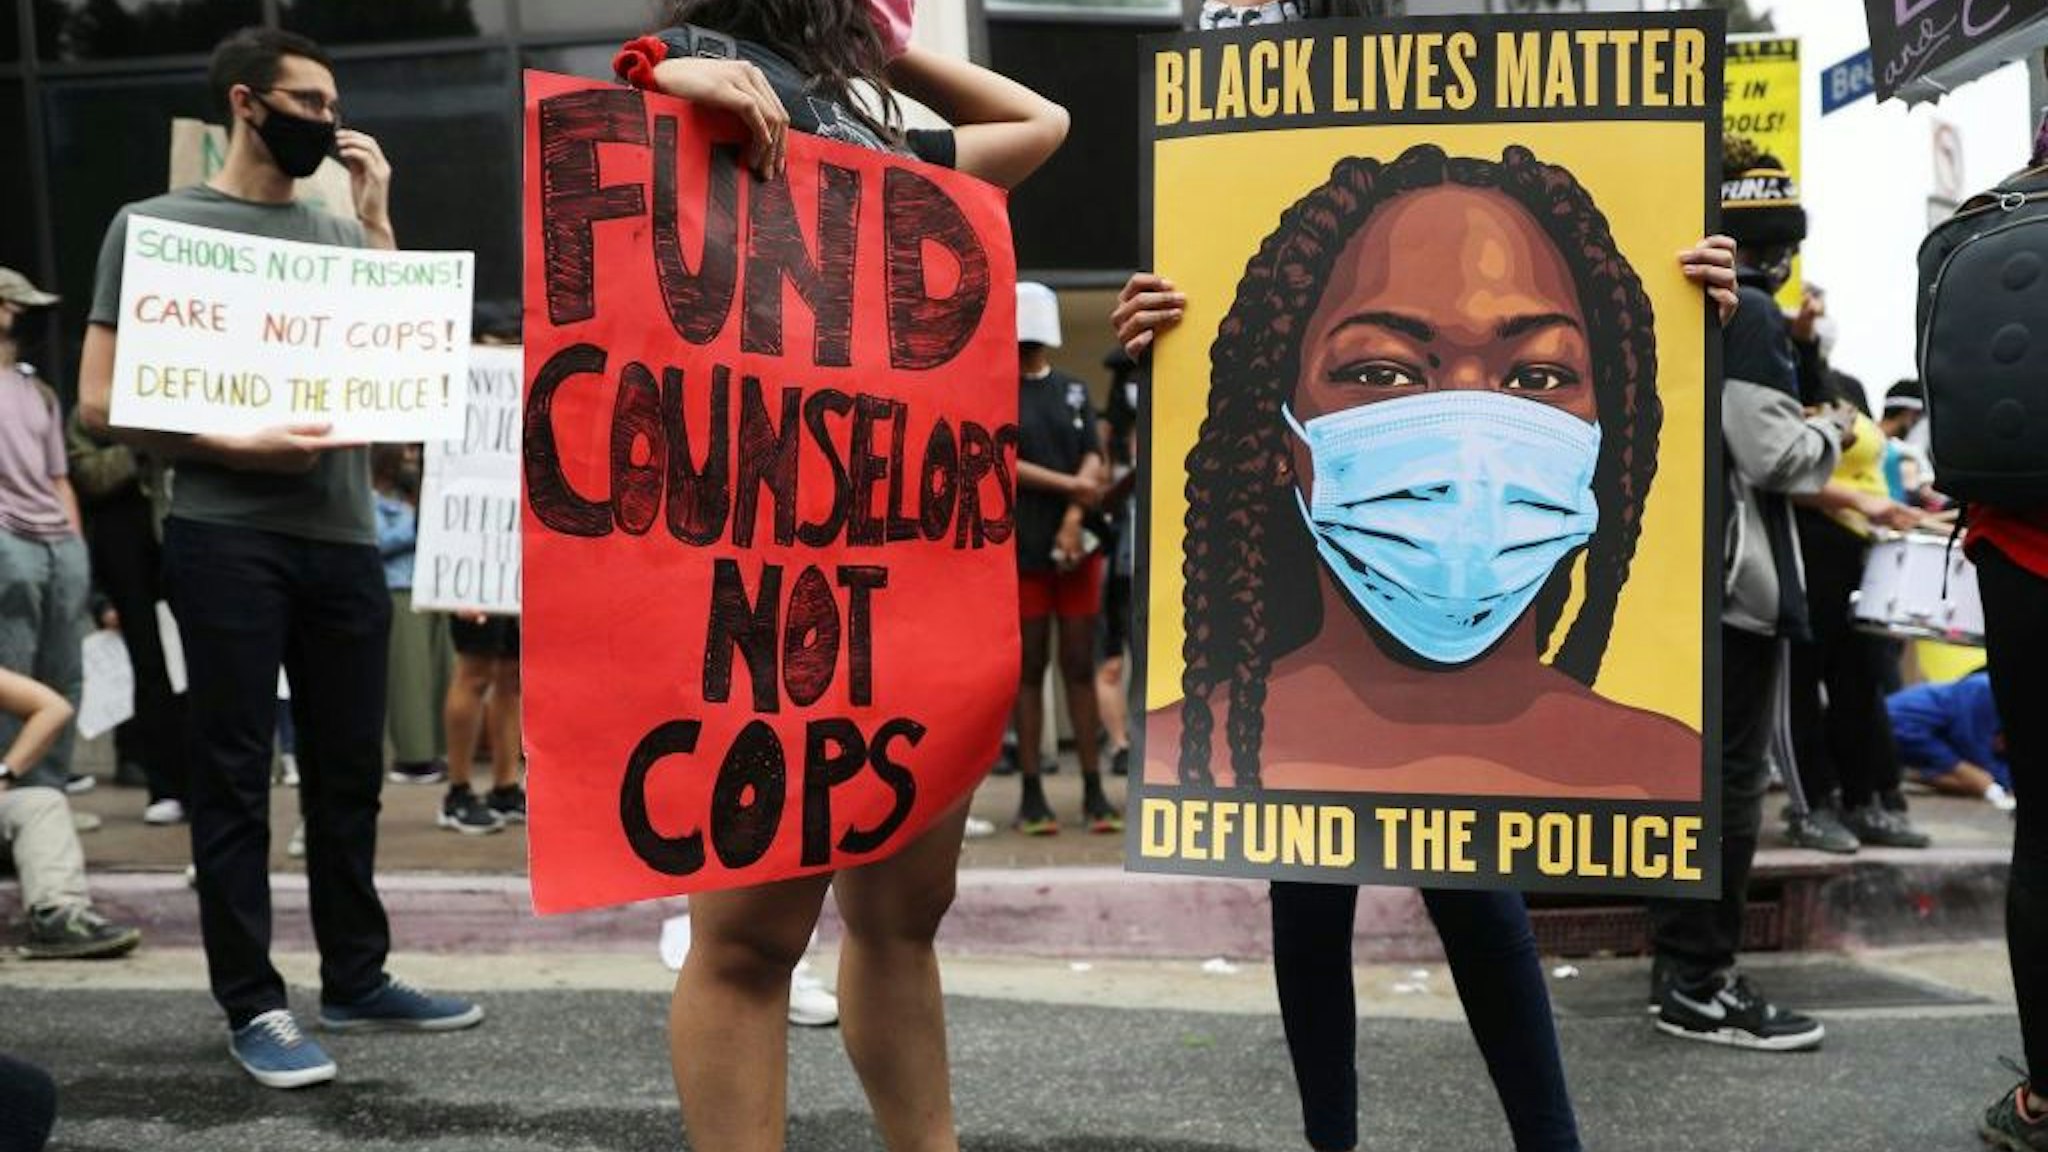 LOS ANGELES, CALIFORNIA - JUNE 23: Black Lives Matter-Los Angeles supporters protest outside the Unified School District headquarters calling on the board of education to defund school police on June 23, 2020 in Los Angeles, California. The demonstrators want the funds currently spent on campus police to be reallocated to other student-serving priorities. (Photo by Mario Tama/Getty Images)